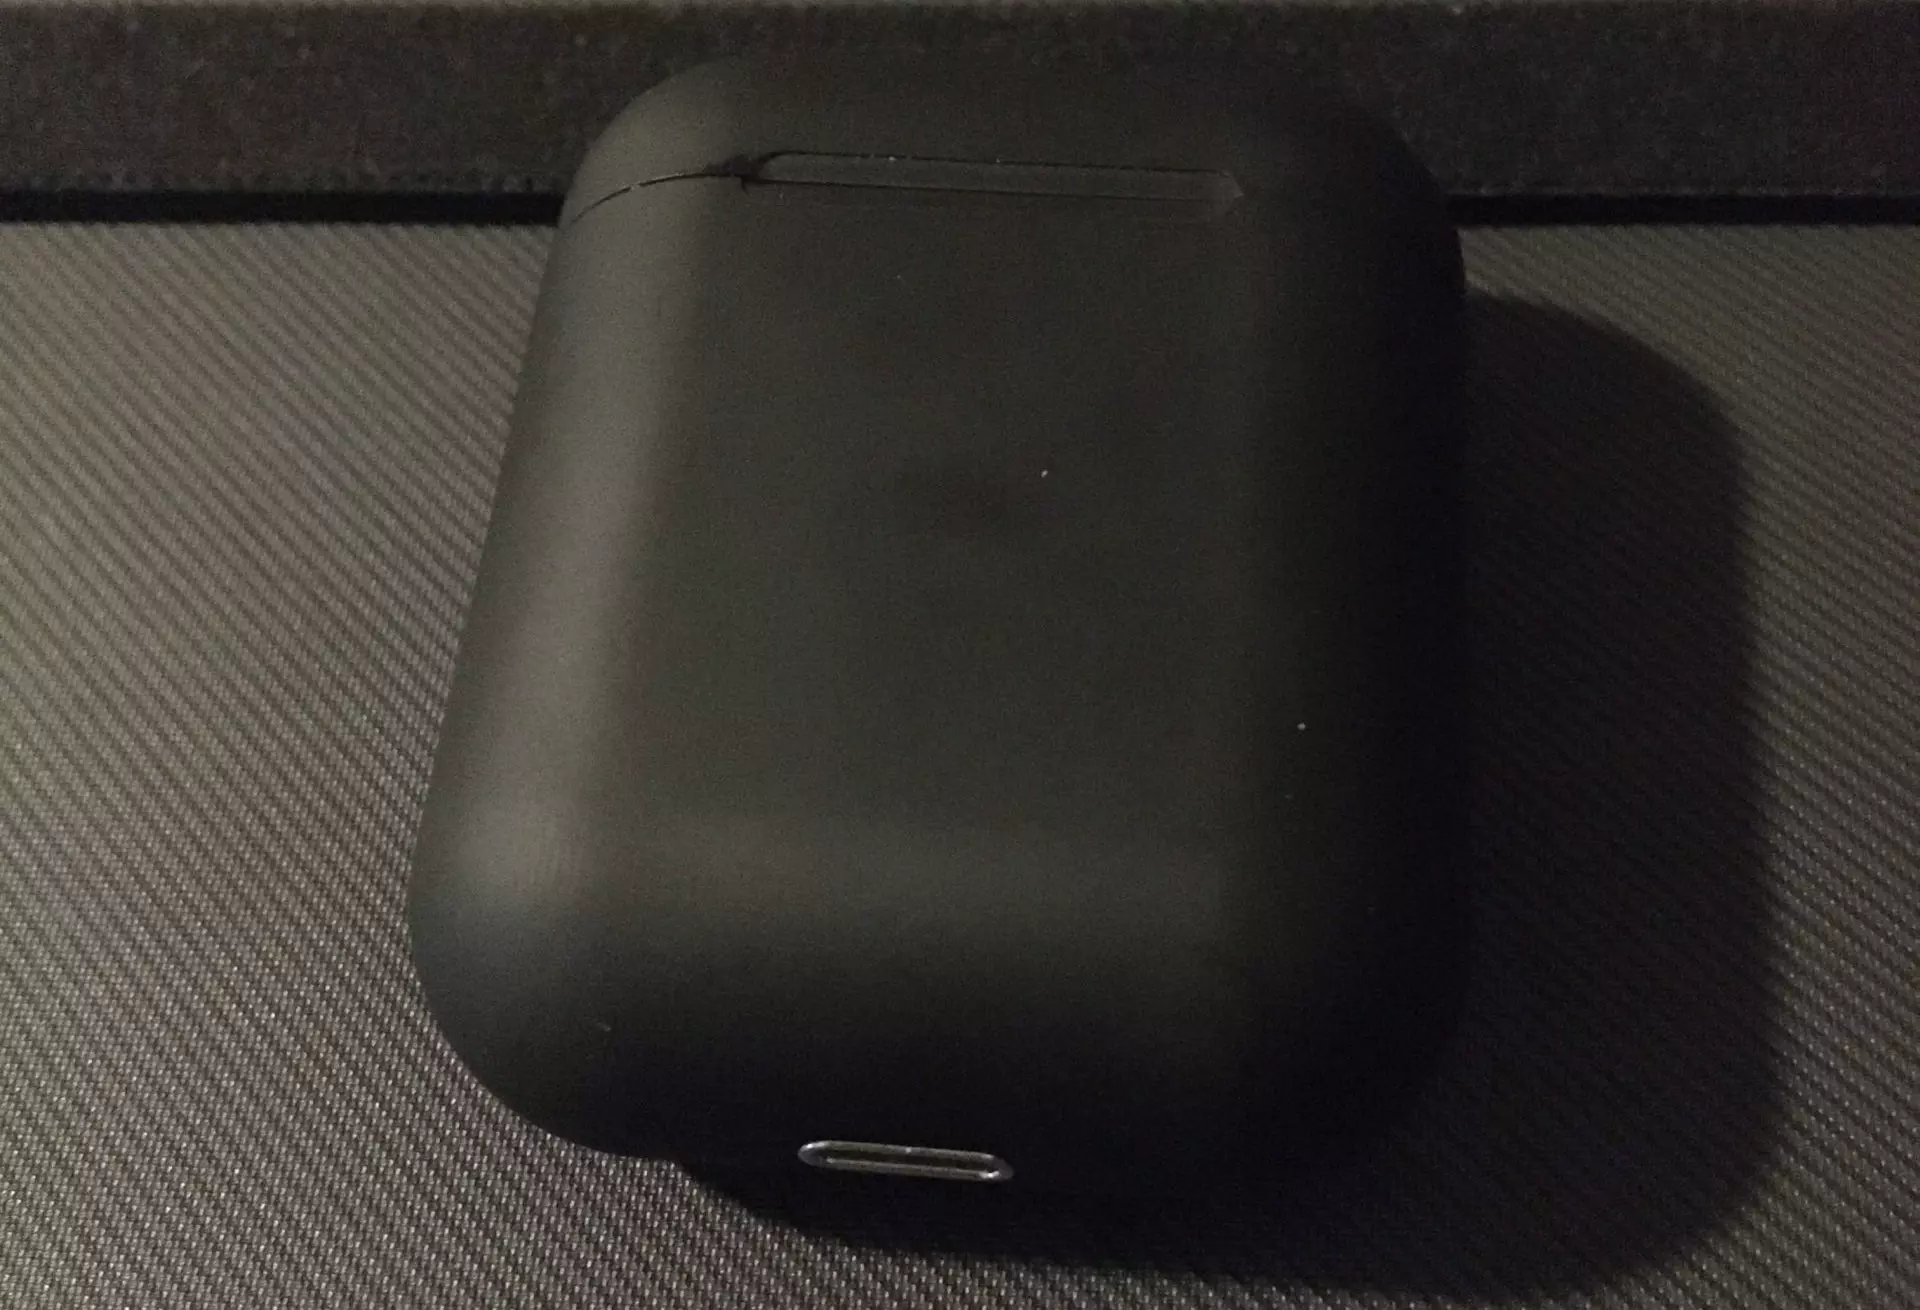 AirPods case resting flat with the lid shut